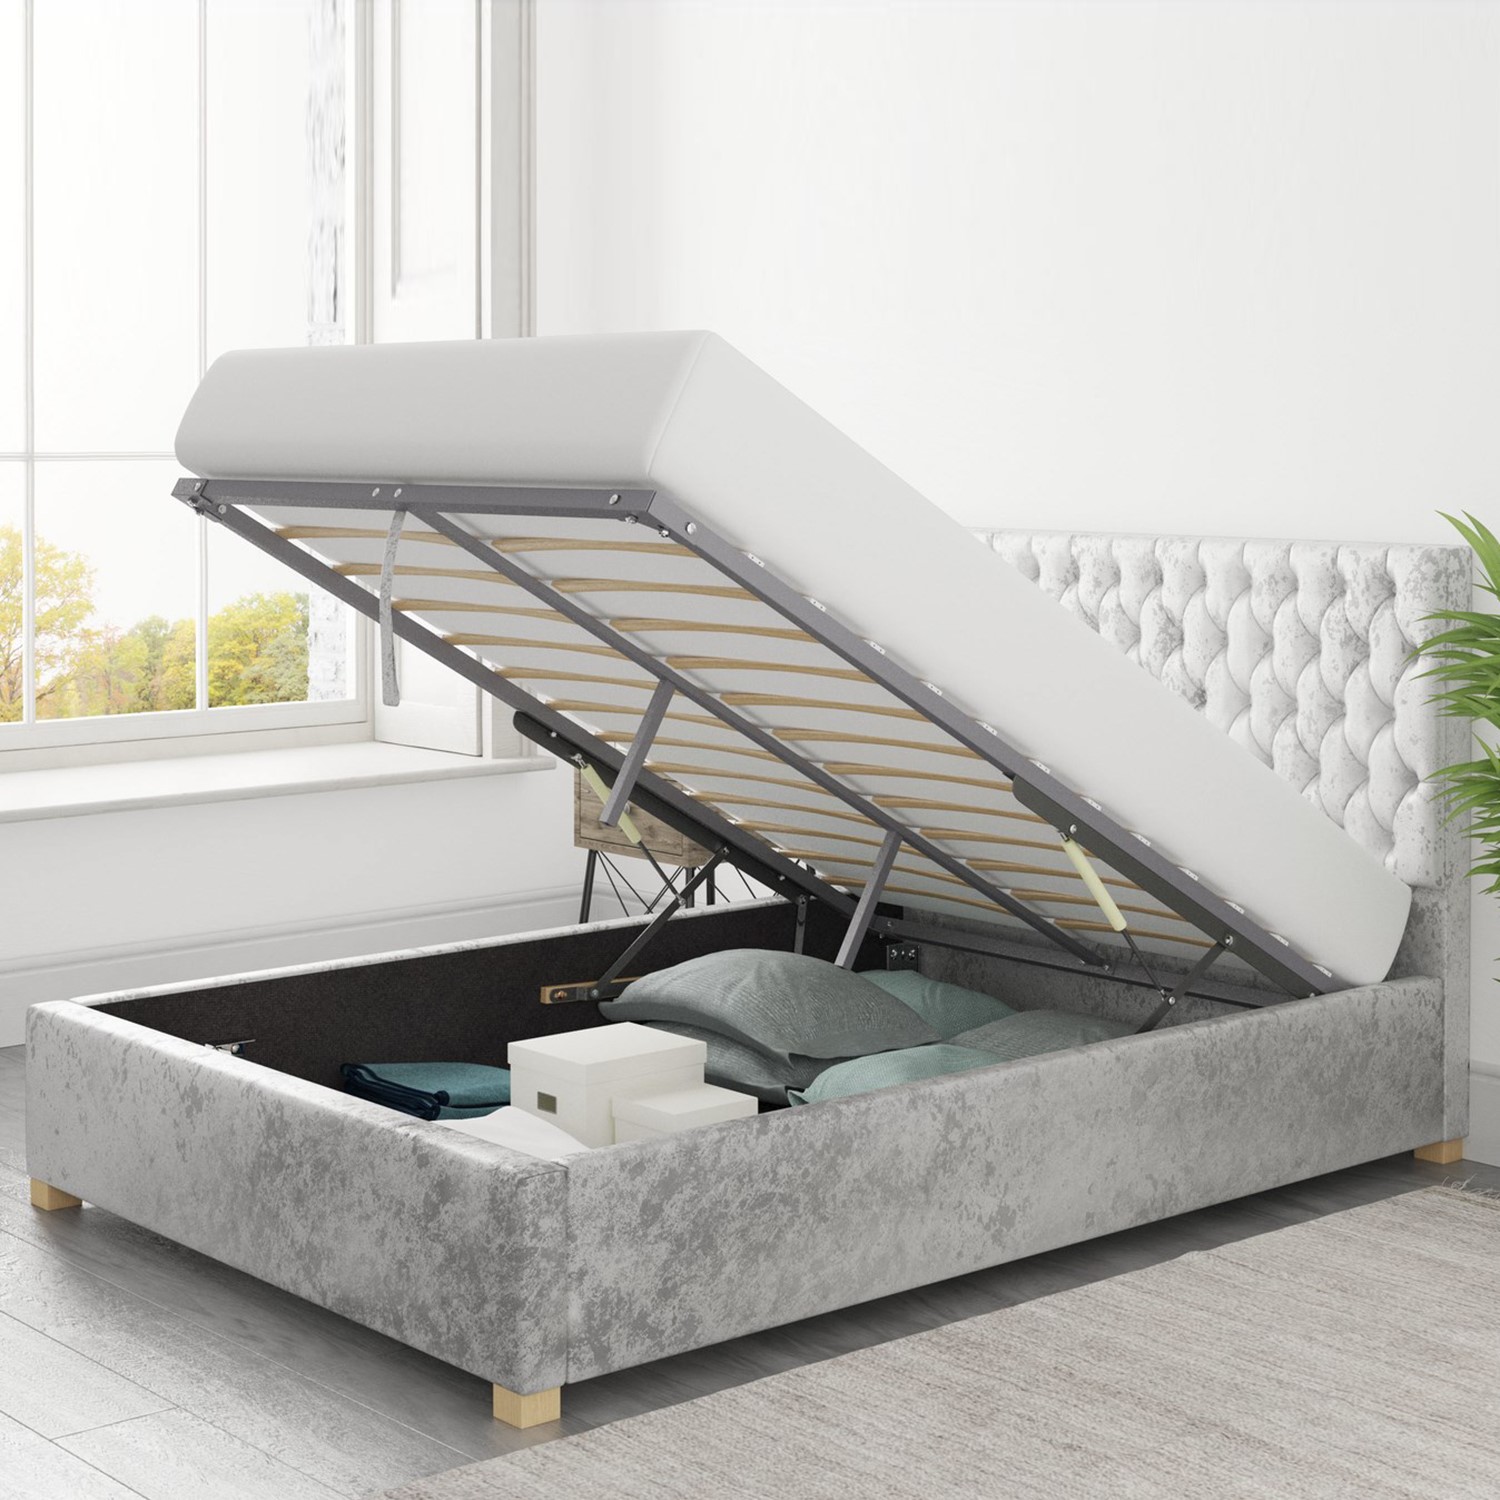 Read more about Silver crushed velvet double ottoman bed angel aspire